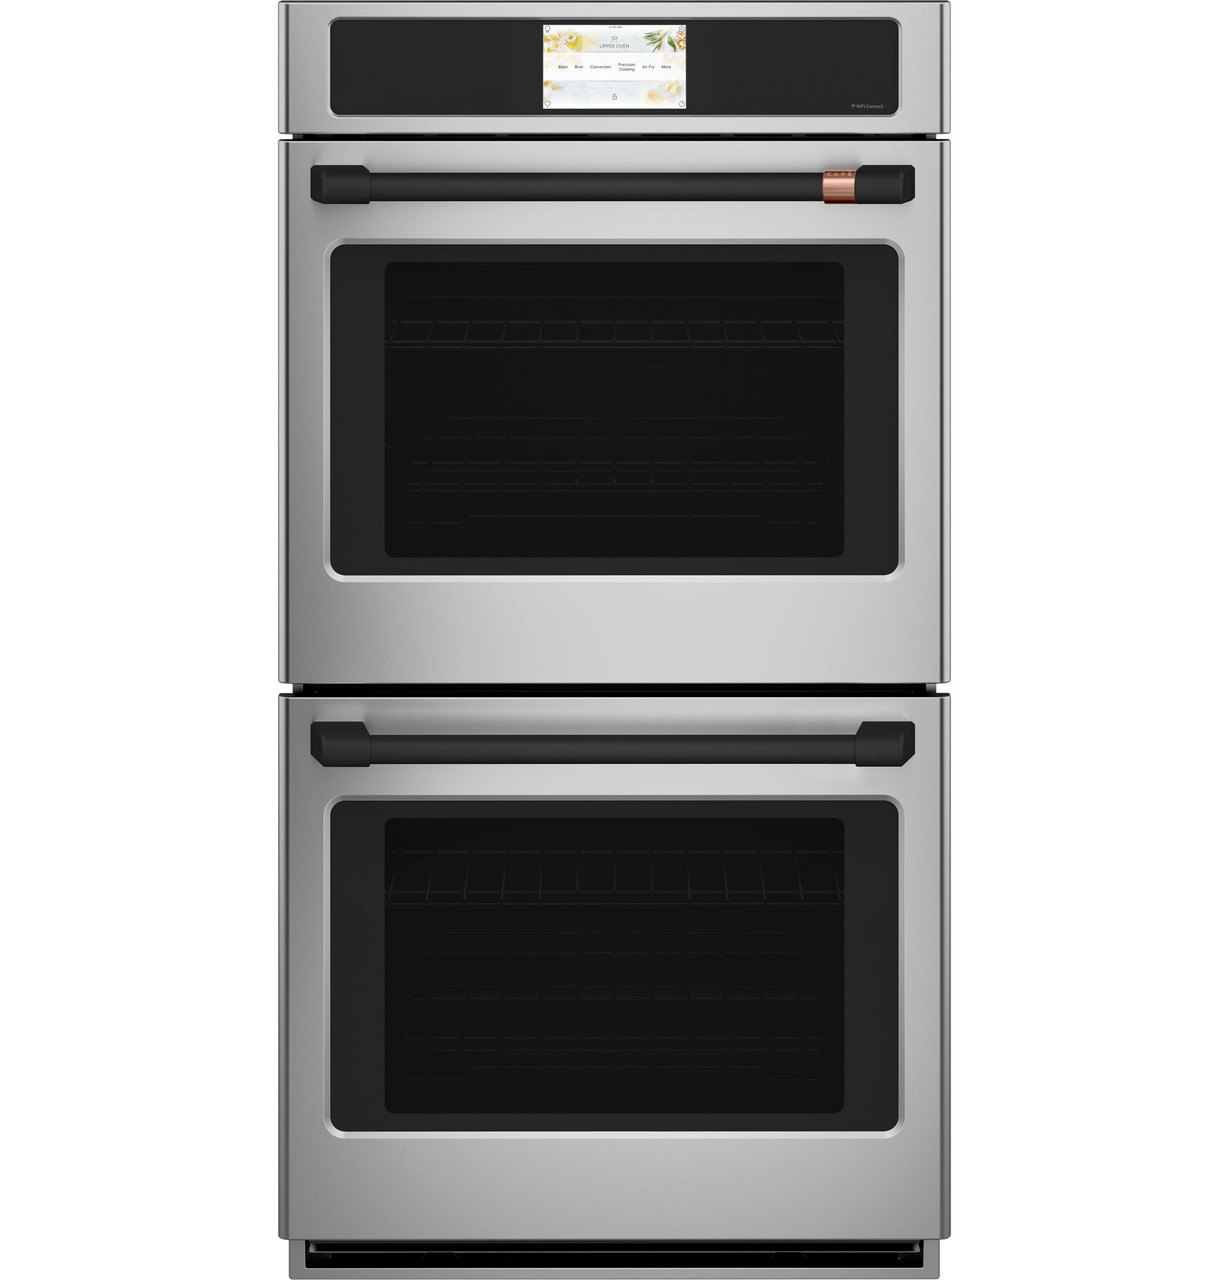 7 Must-Ask Questions When Deciding to Install a Wall Oven